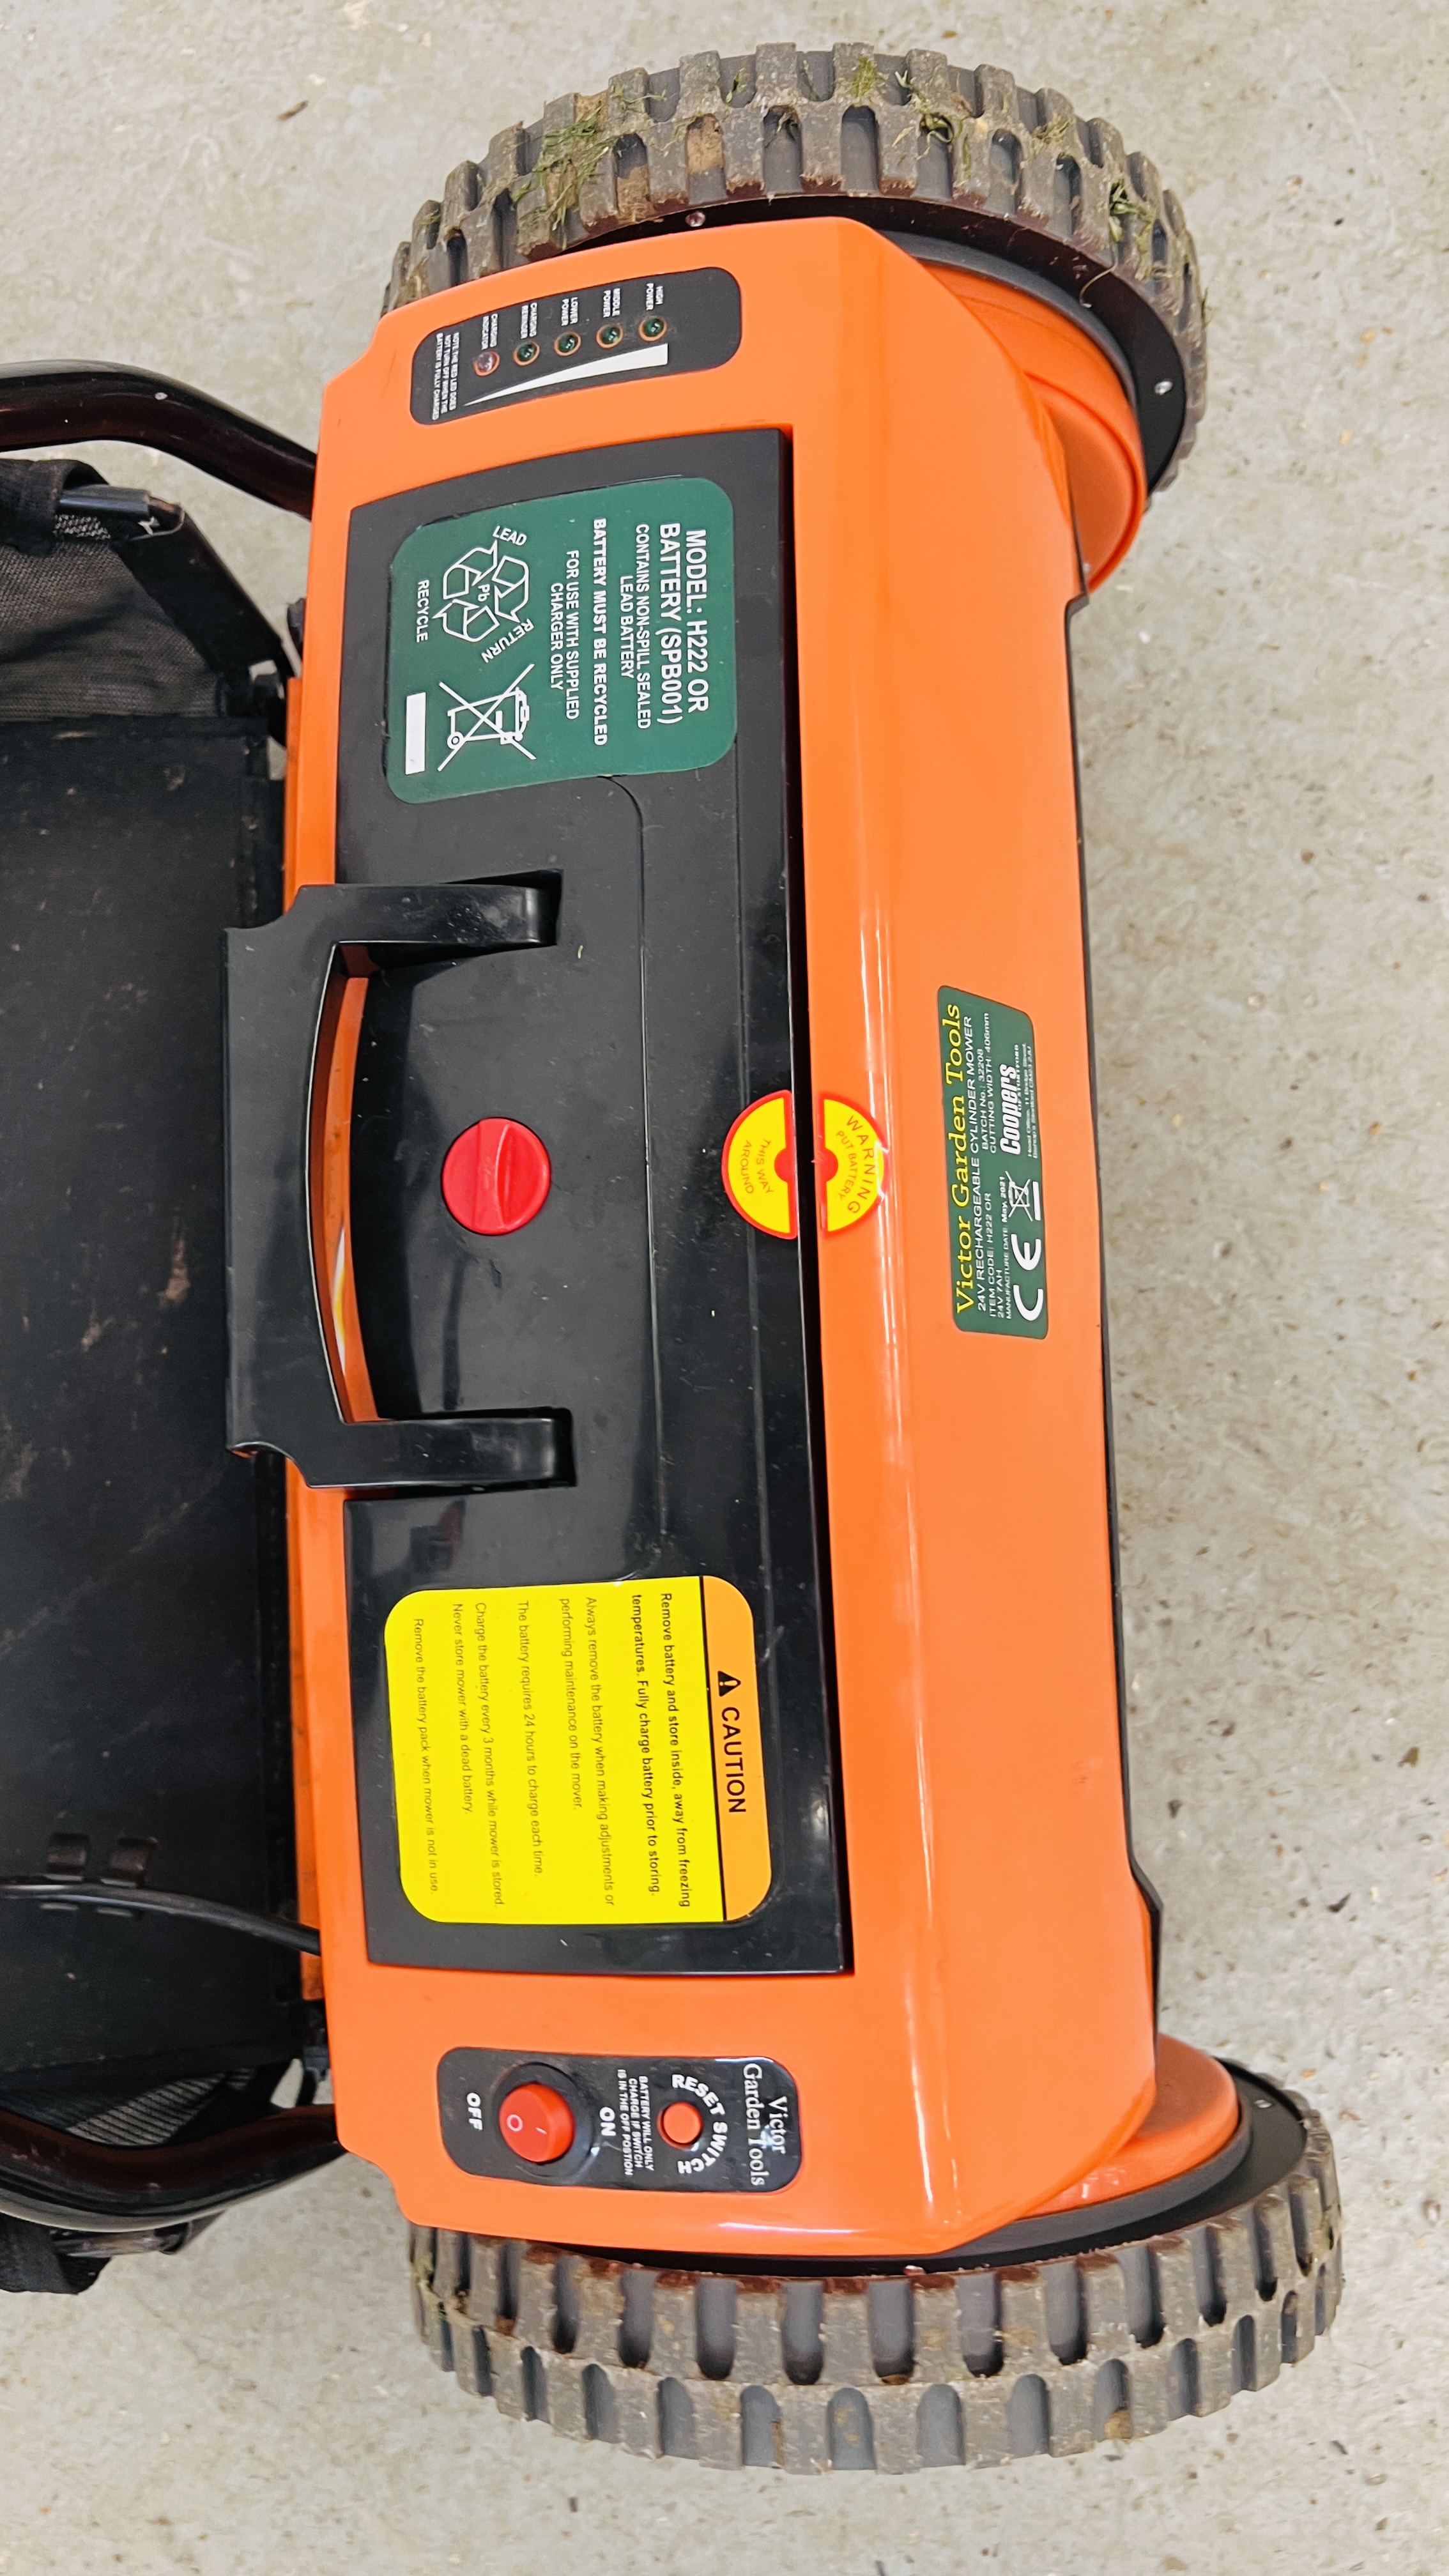 A VICTOR GARDEN TOOLS 24 VOLT RECHARGEABLE CYLINDER MOWER COMPLETE WITH CHARGER AND MANUAL. - Image 4 of 6